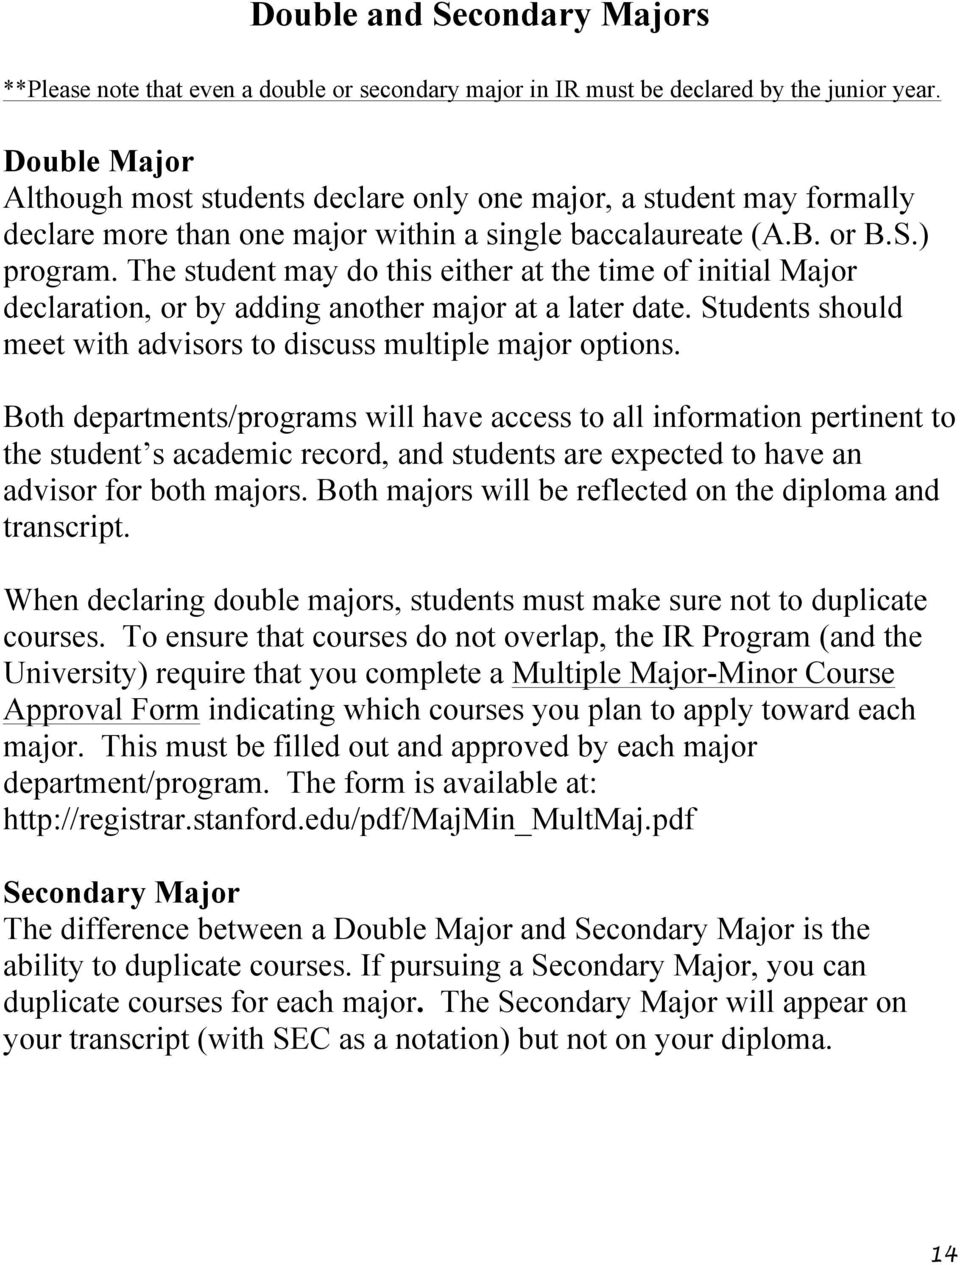 The student may do this either at the time of initial Major declaration, or by adding another major at a later date. Students should meet with advisors to discuss multiple major options.